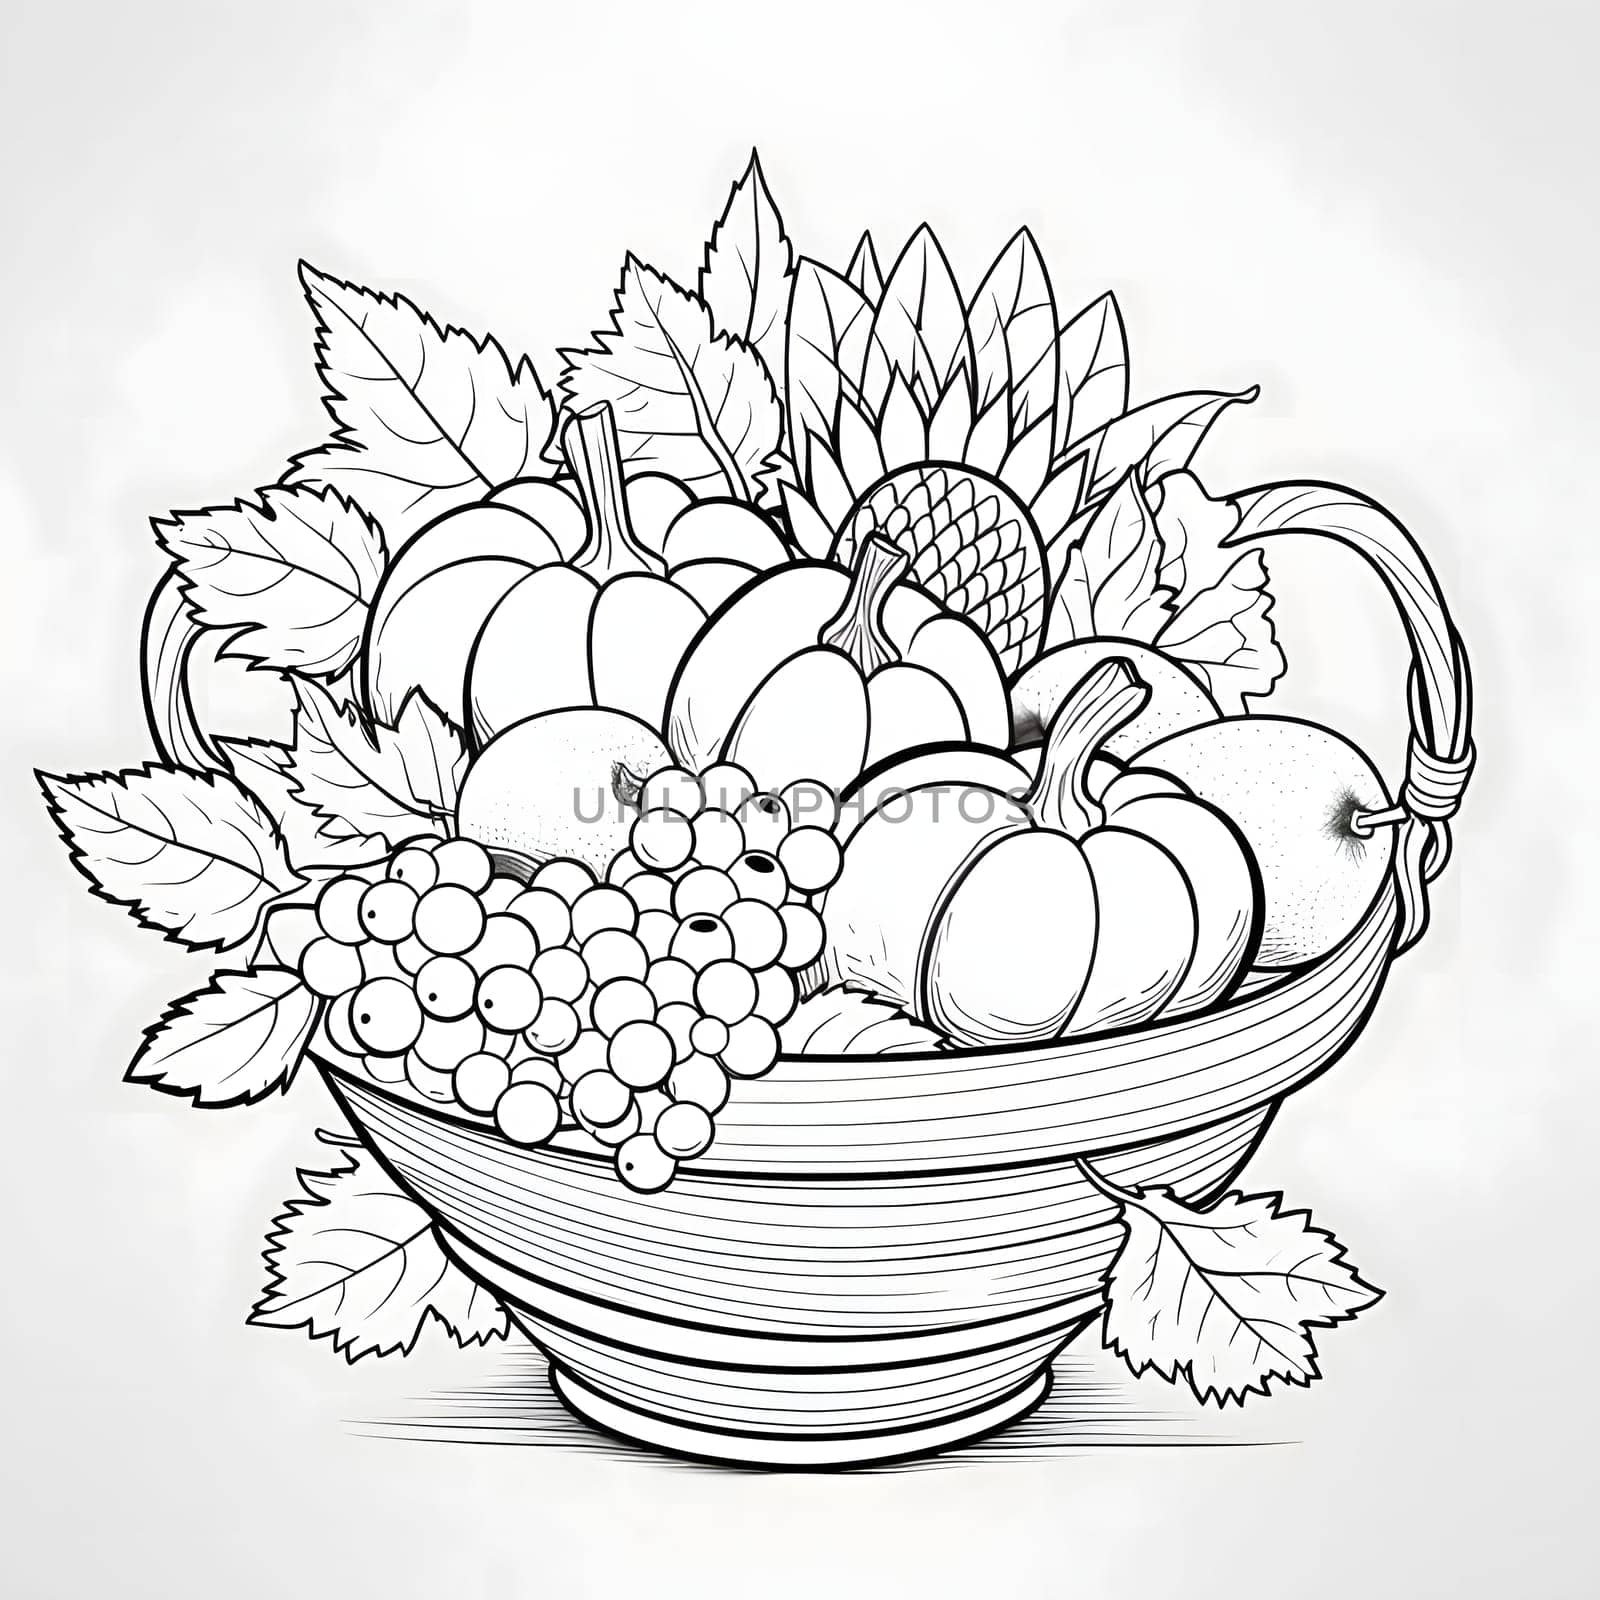 Black and White coloring book, basket full of vegetables and fruits pumpkins peppers, grape leaves. Pumpkin as a dish of thanksgiving for the harvest, picture on a white isolated background. An atmosphere of joy and celebration.